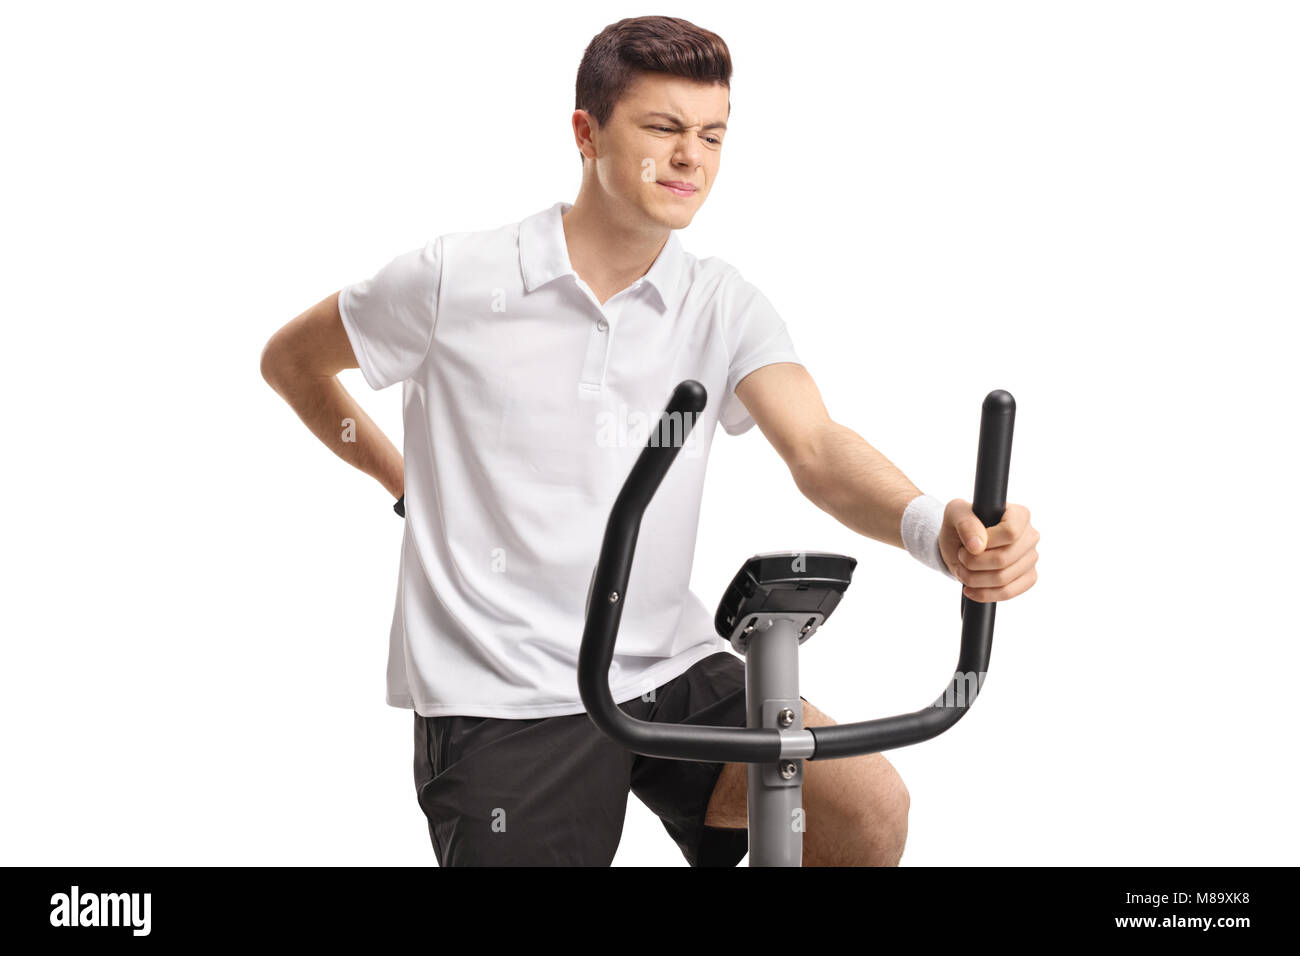 Teenager riding an exercise bike and experiencing back pain isolated on white background Stock Photo